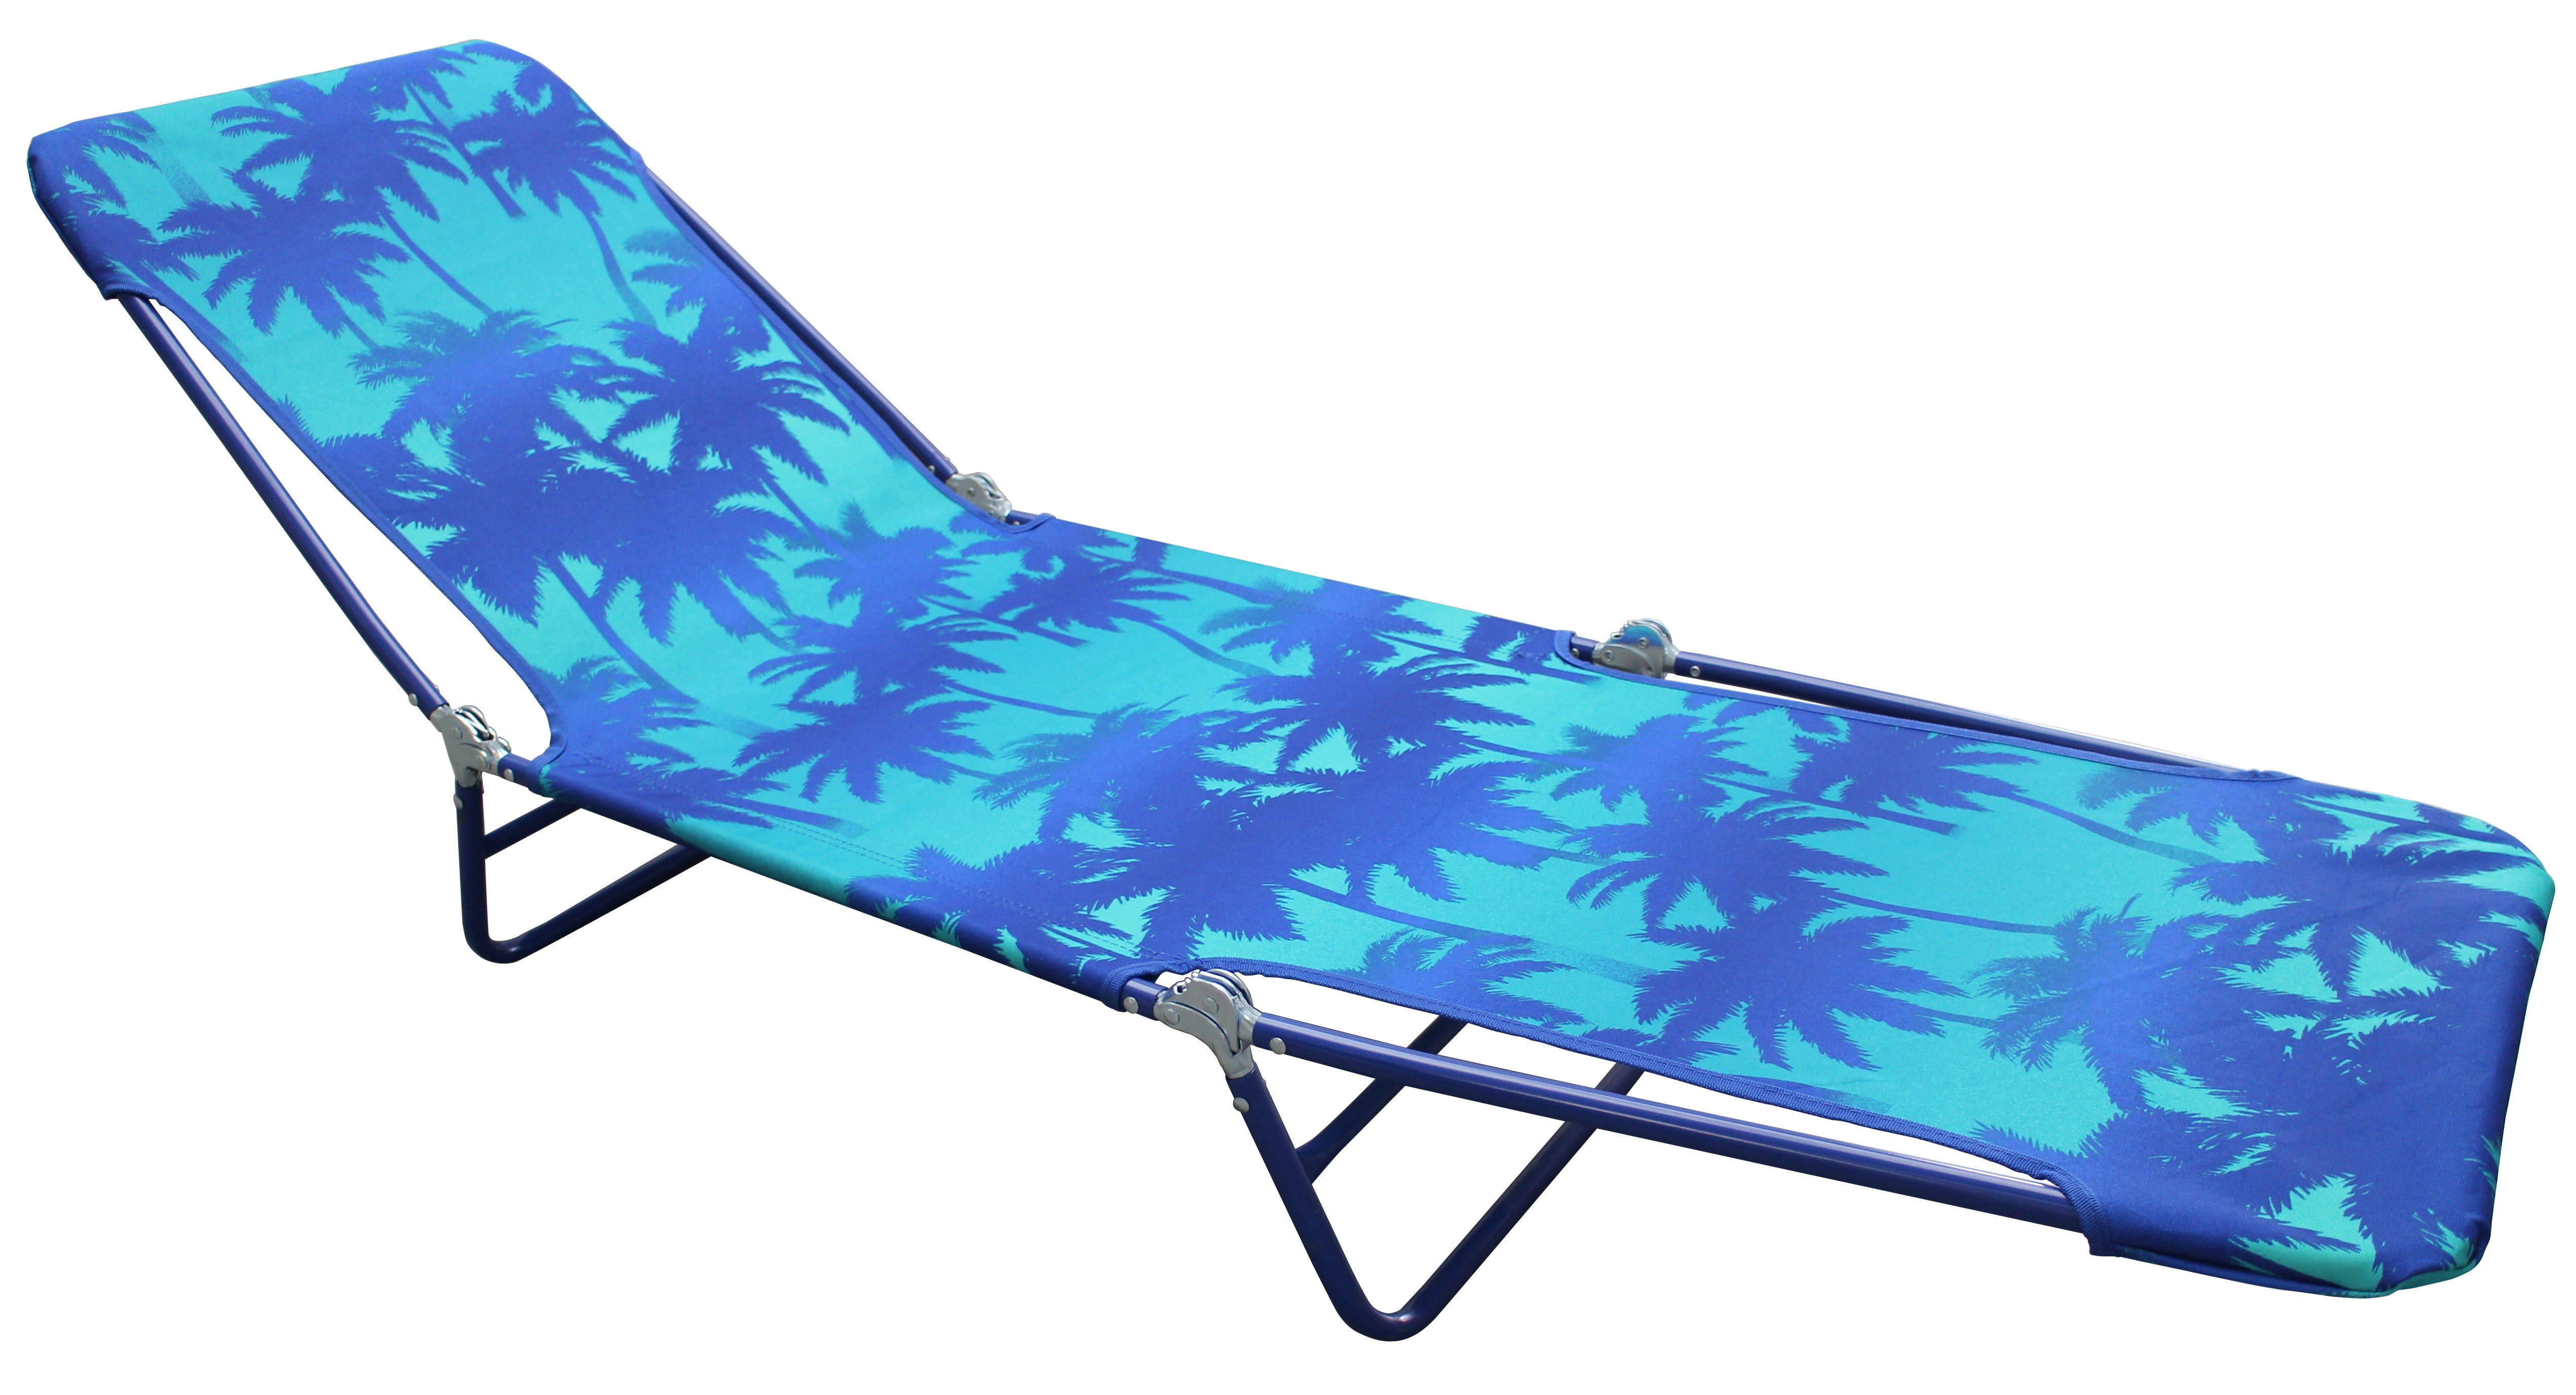  Mainstays Fabric Beach Lounge Chair for Large Space